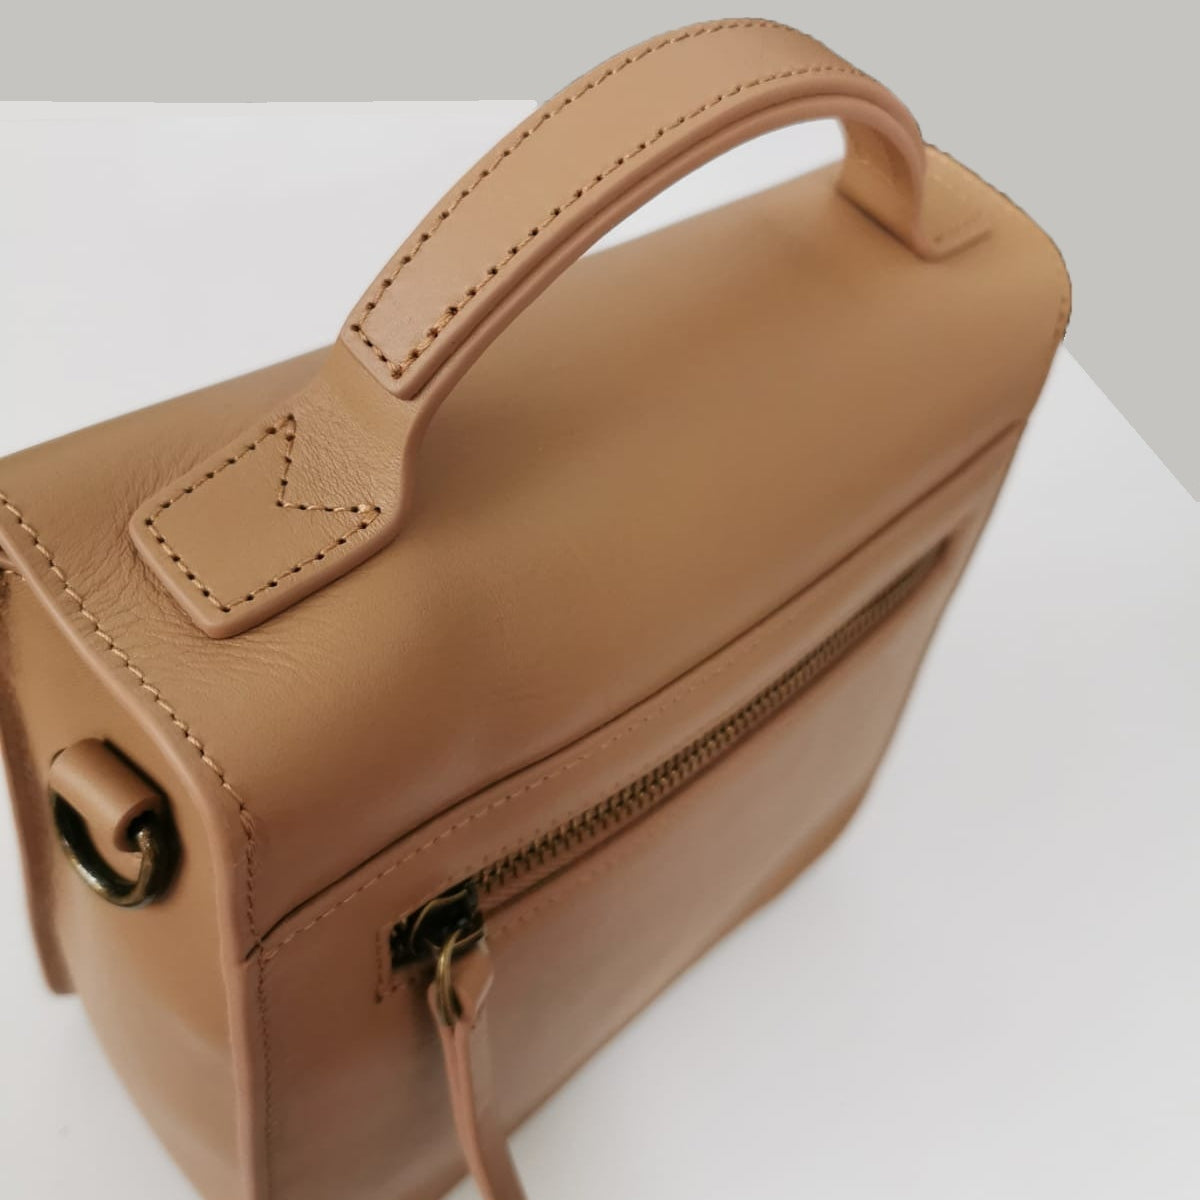 Leather crossbody bag in light brown colour